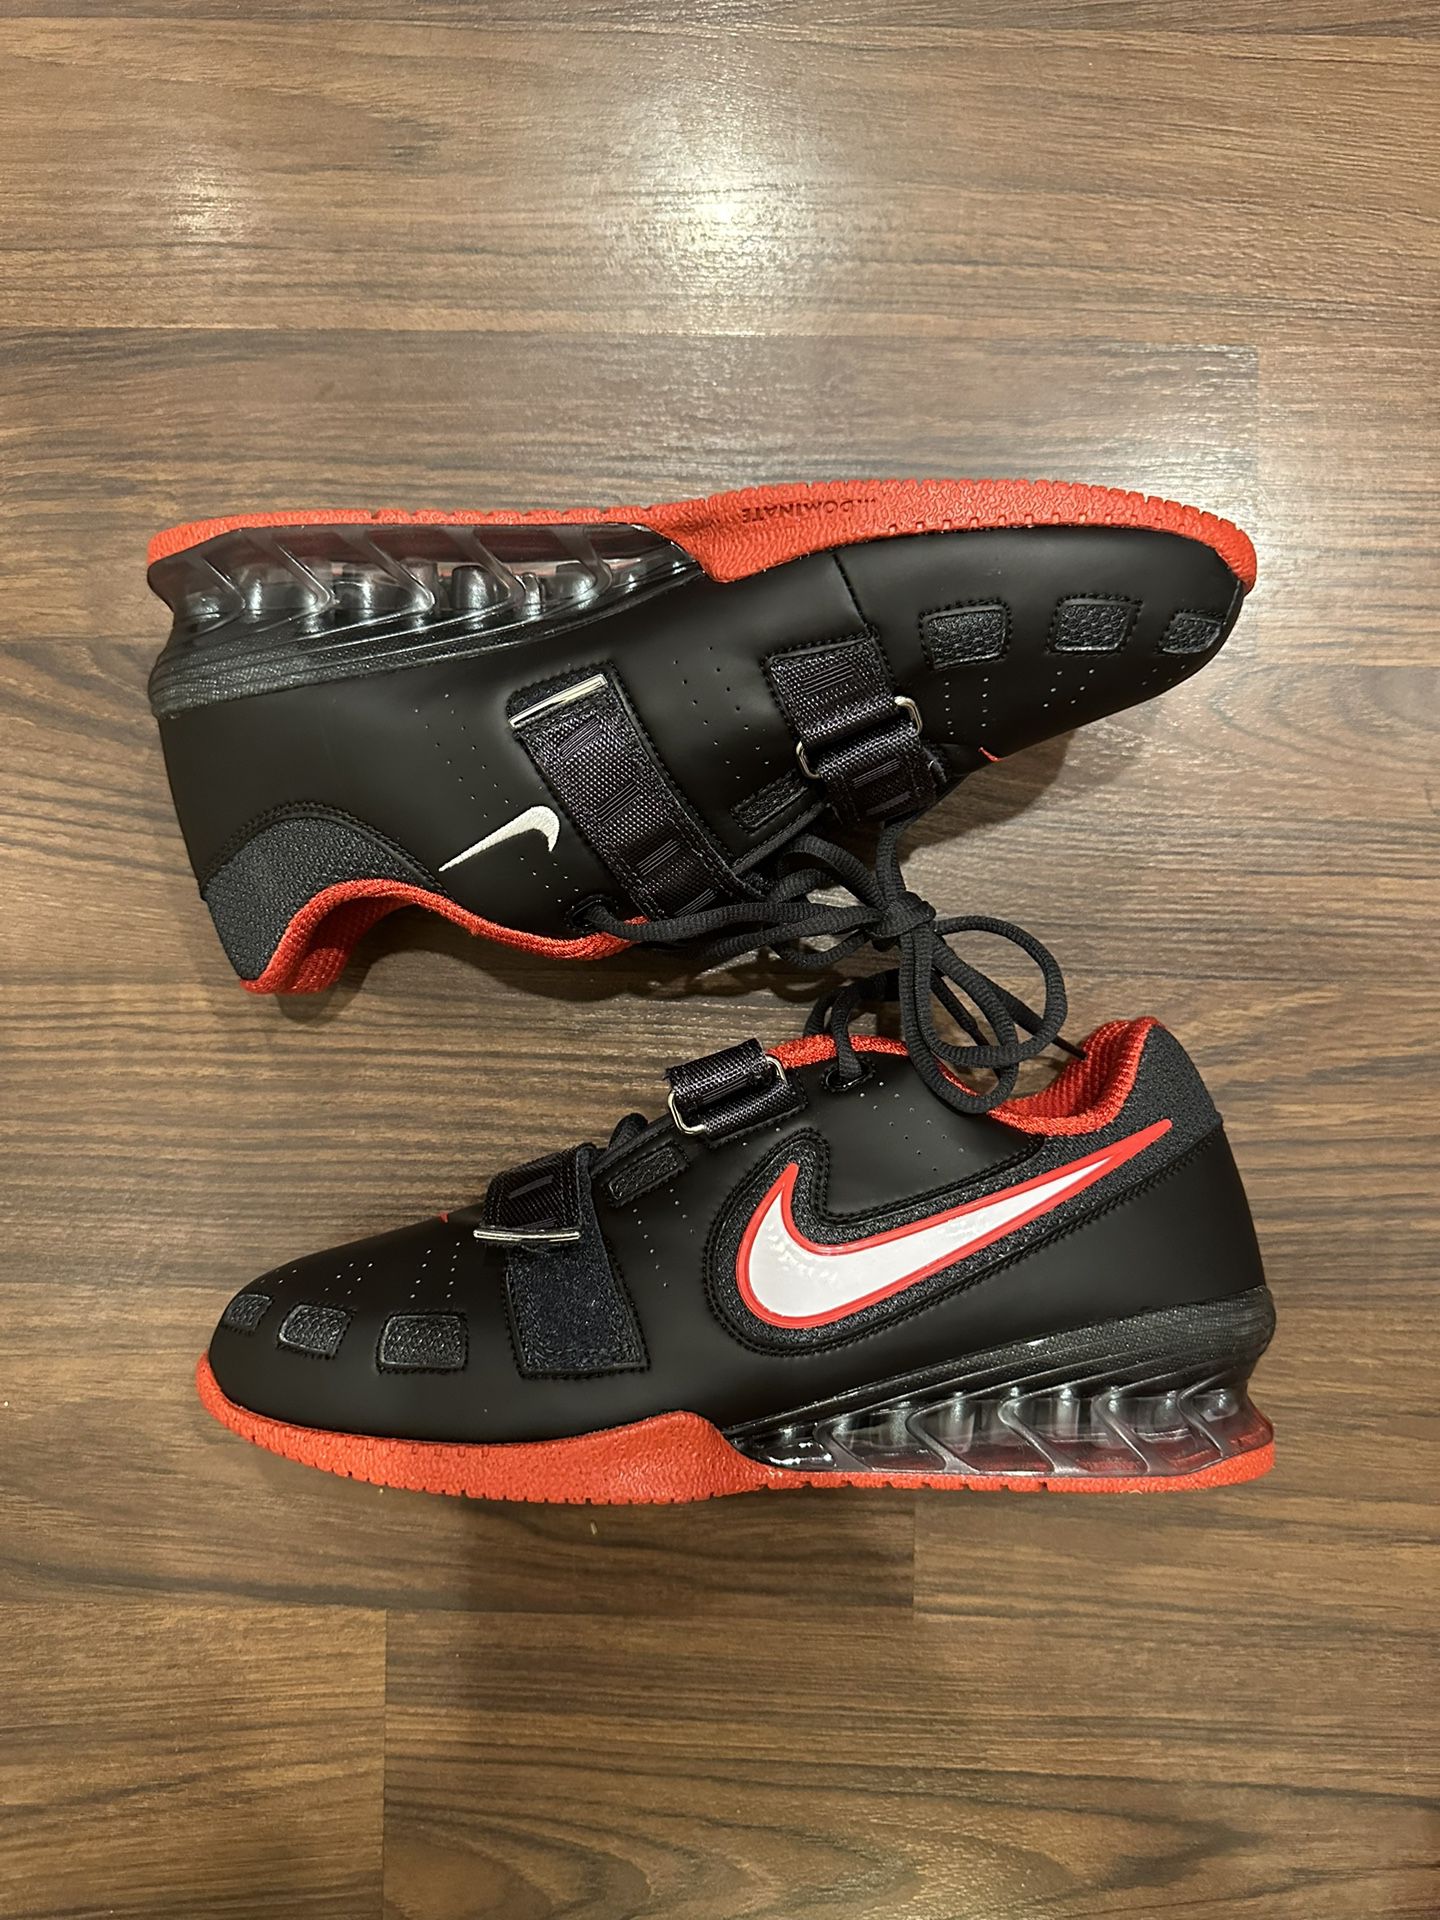 Punto de referencia Comprensión sentido Nike Romaleos 2 Olympic Weightlifting Shoes - Size Men's 9.5 (Brand  New/Never Worn) for Sale in Los Angeles, CA - OfferUp